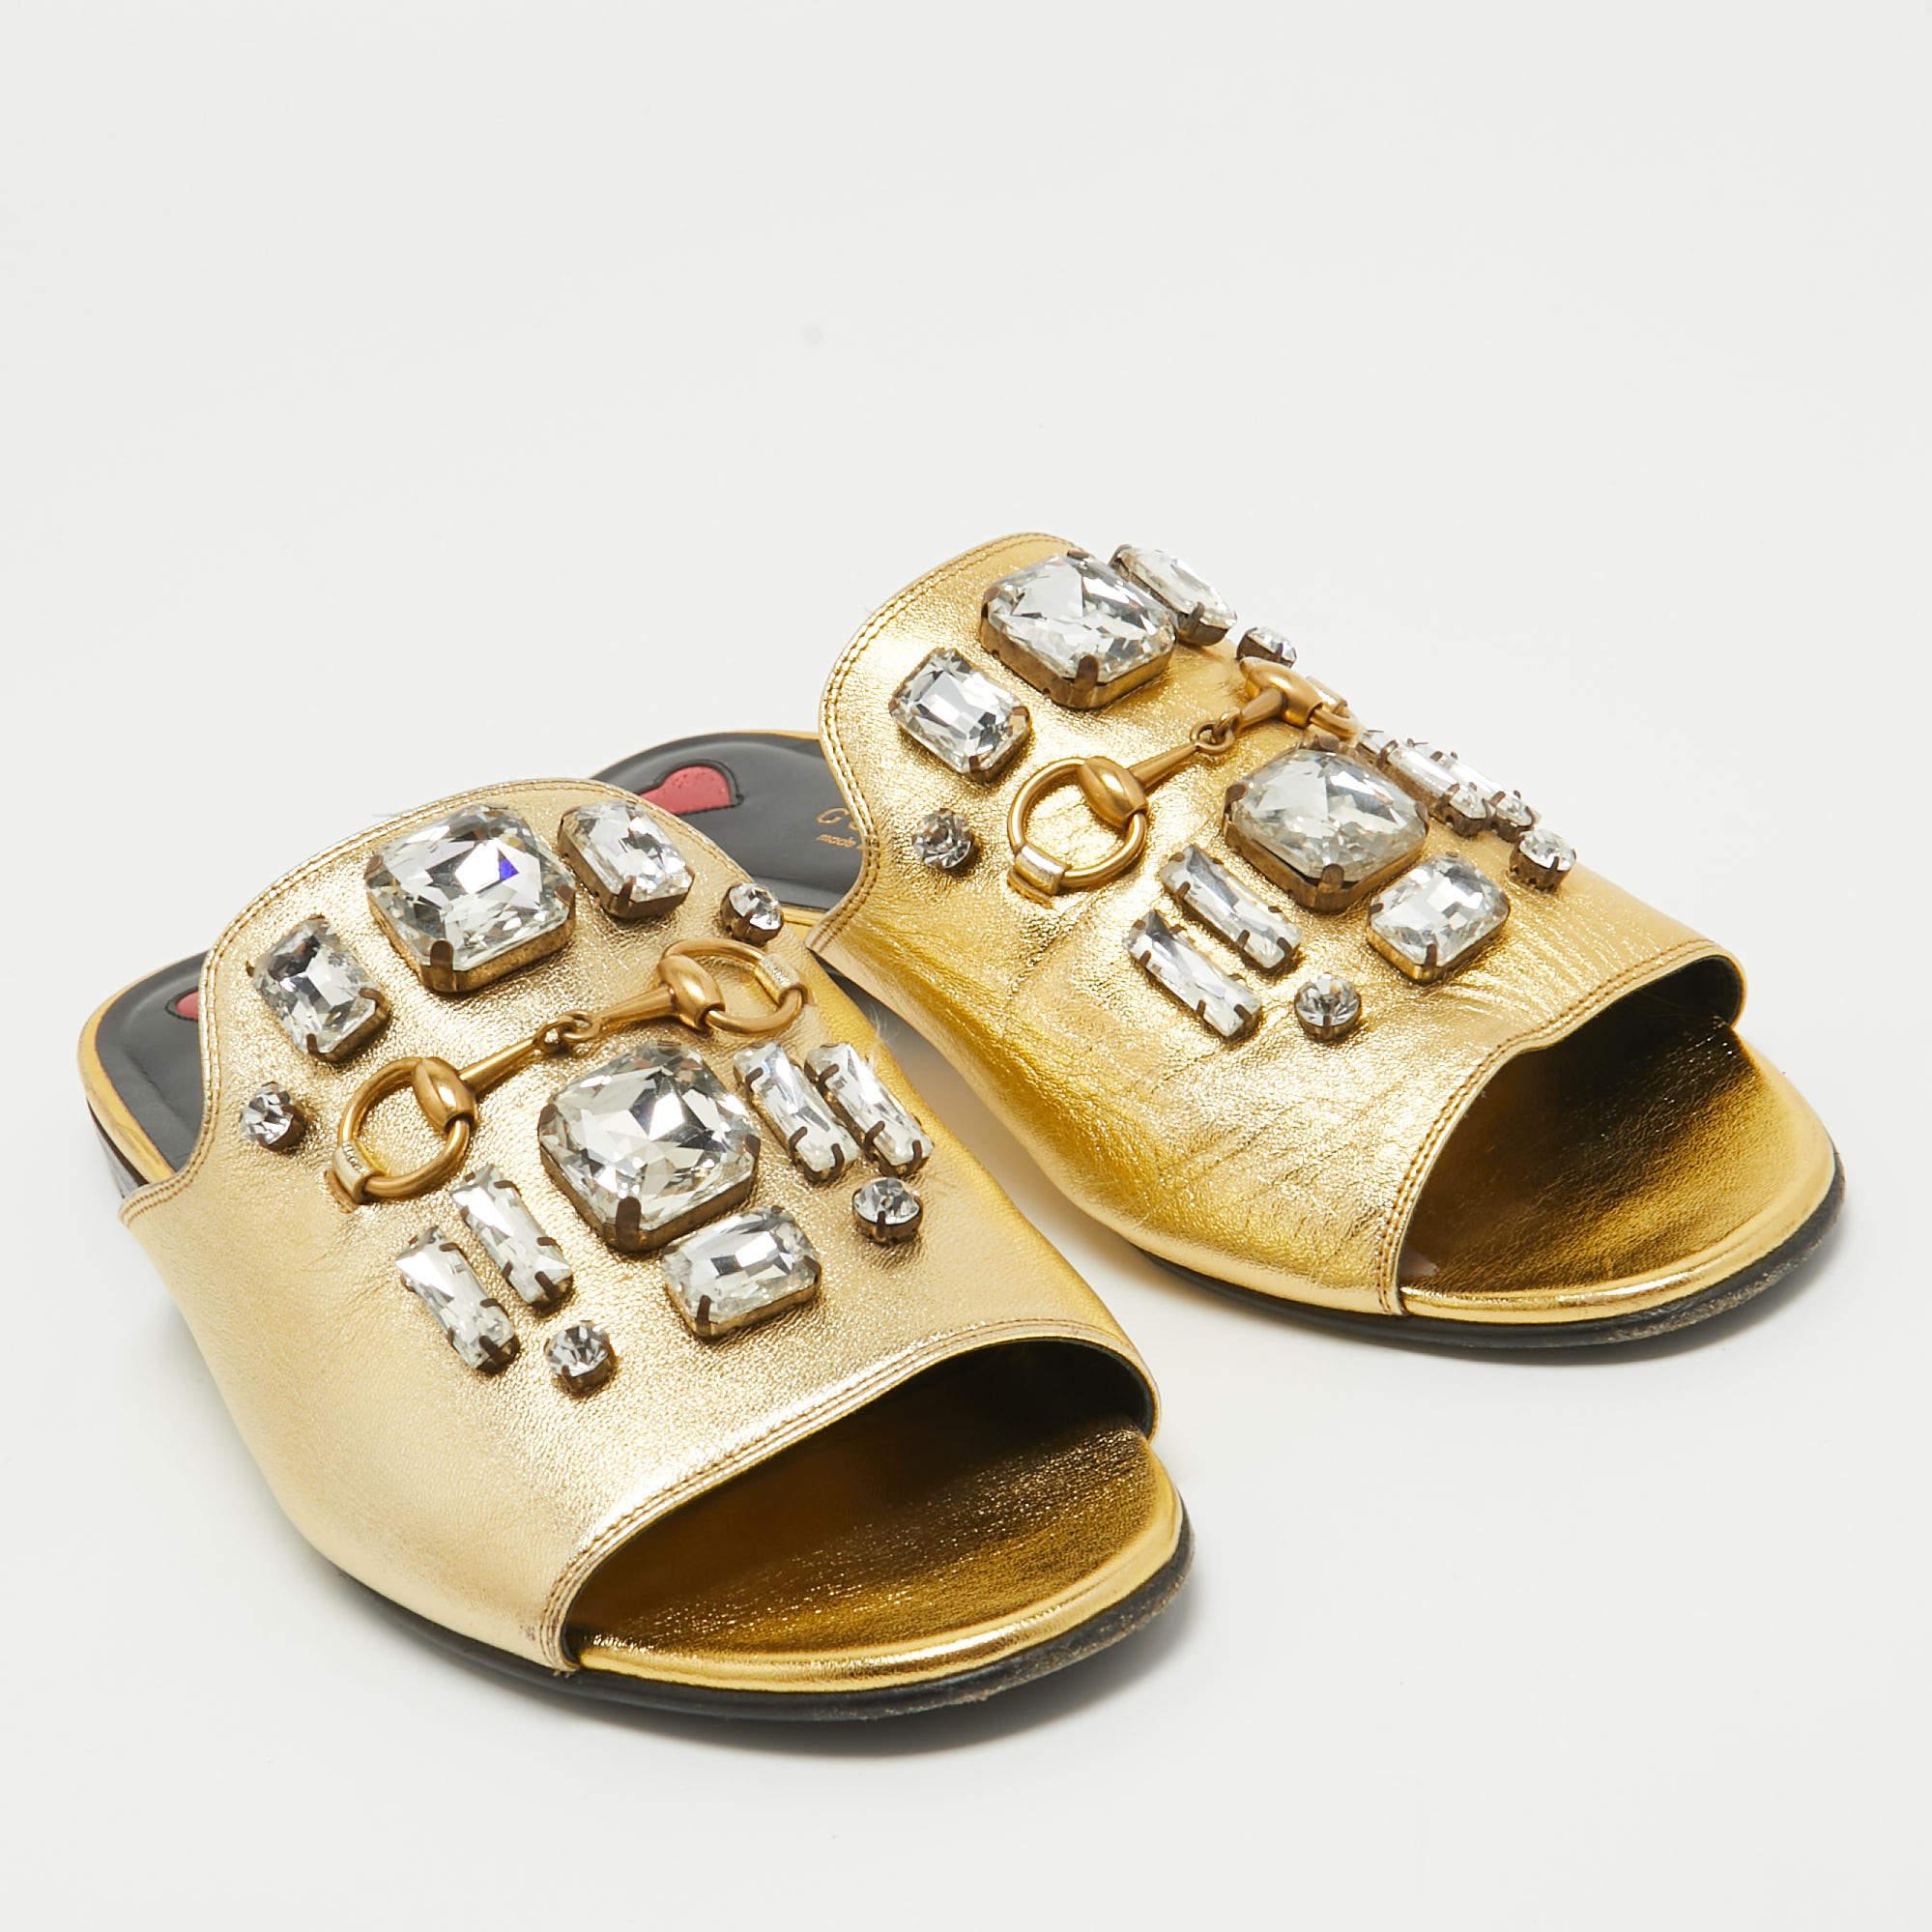 Gucci Gold Leather Horsebit Crystal Embellished Flat Slides Size 39 In Good Condition For Sale In Dubai, Al Qouz 2